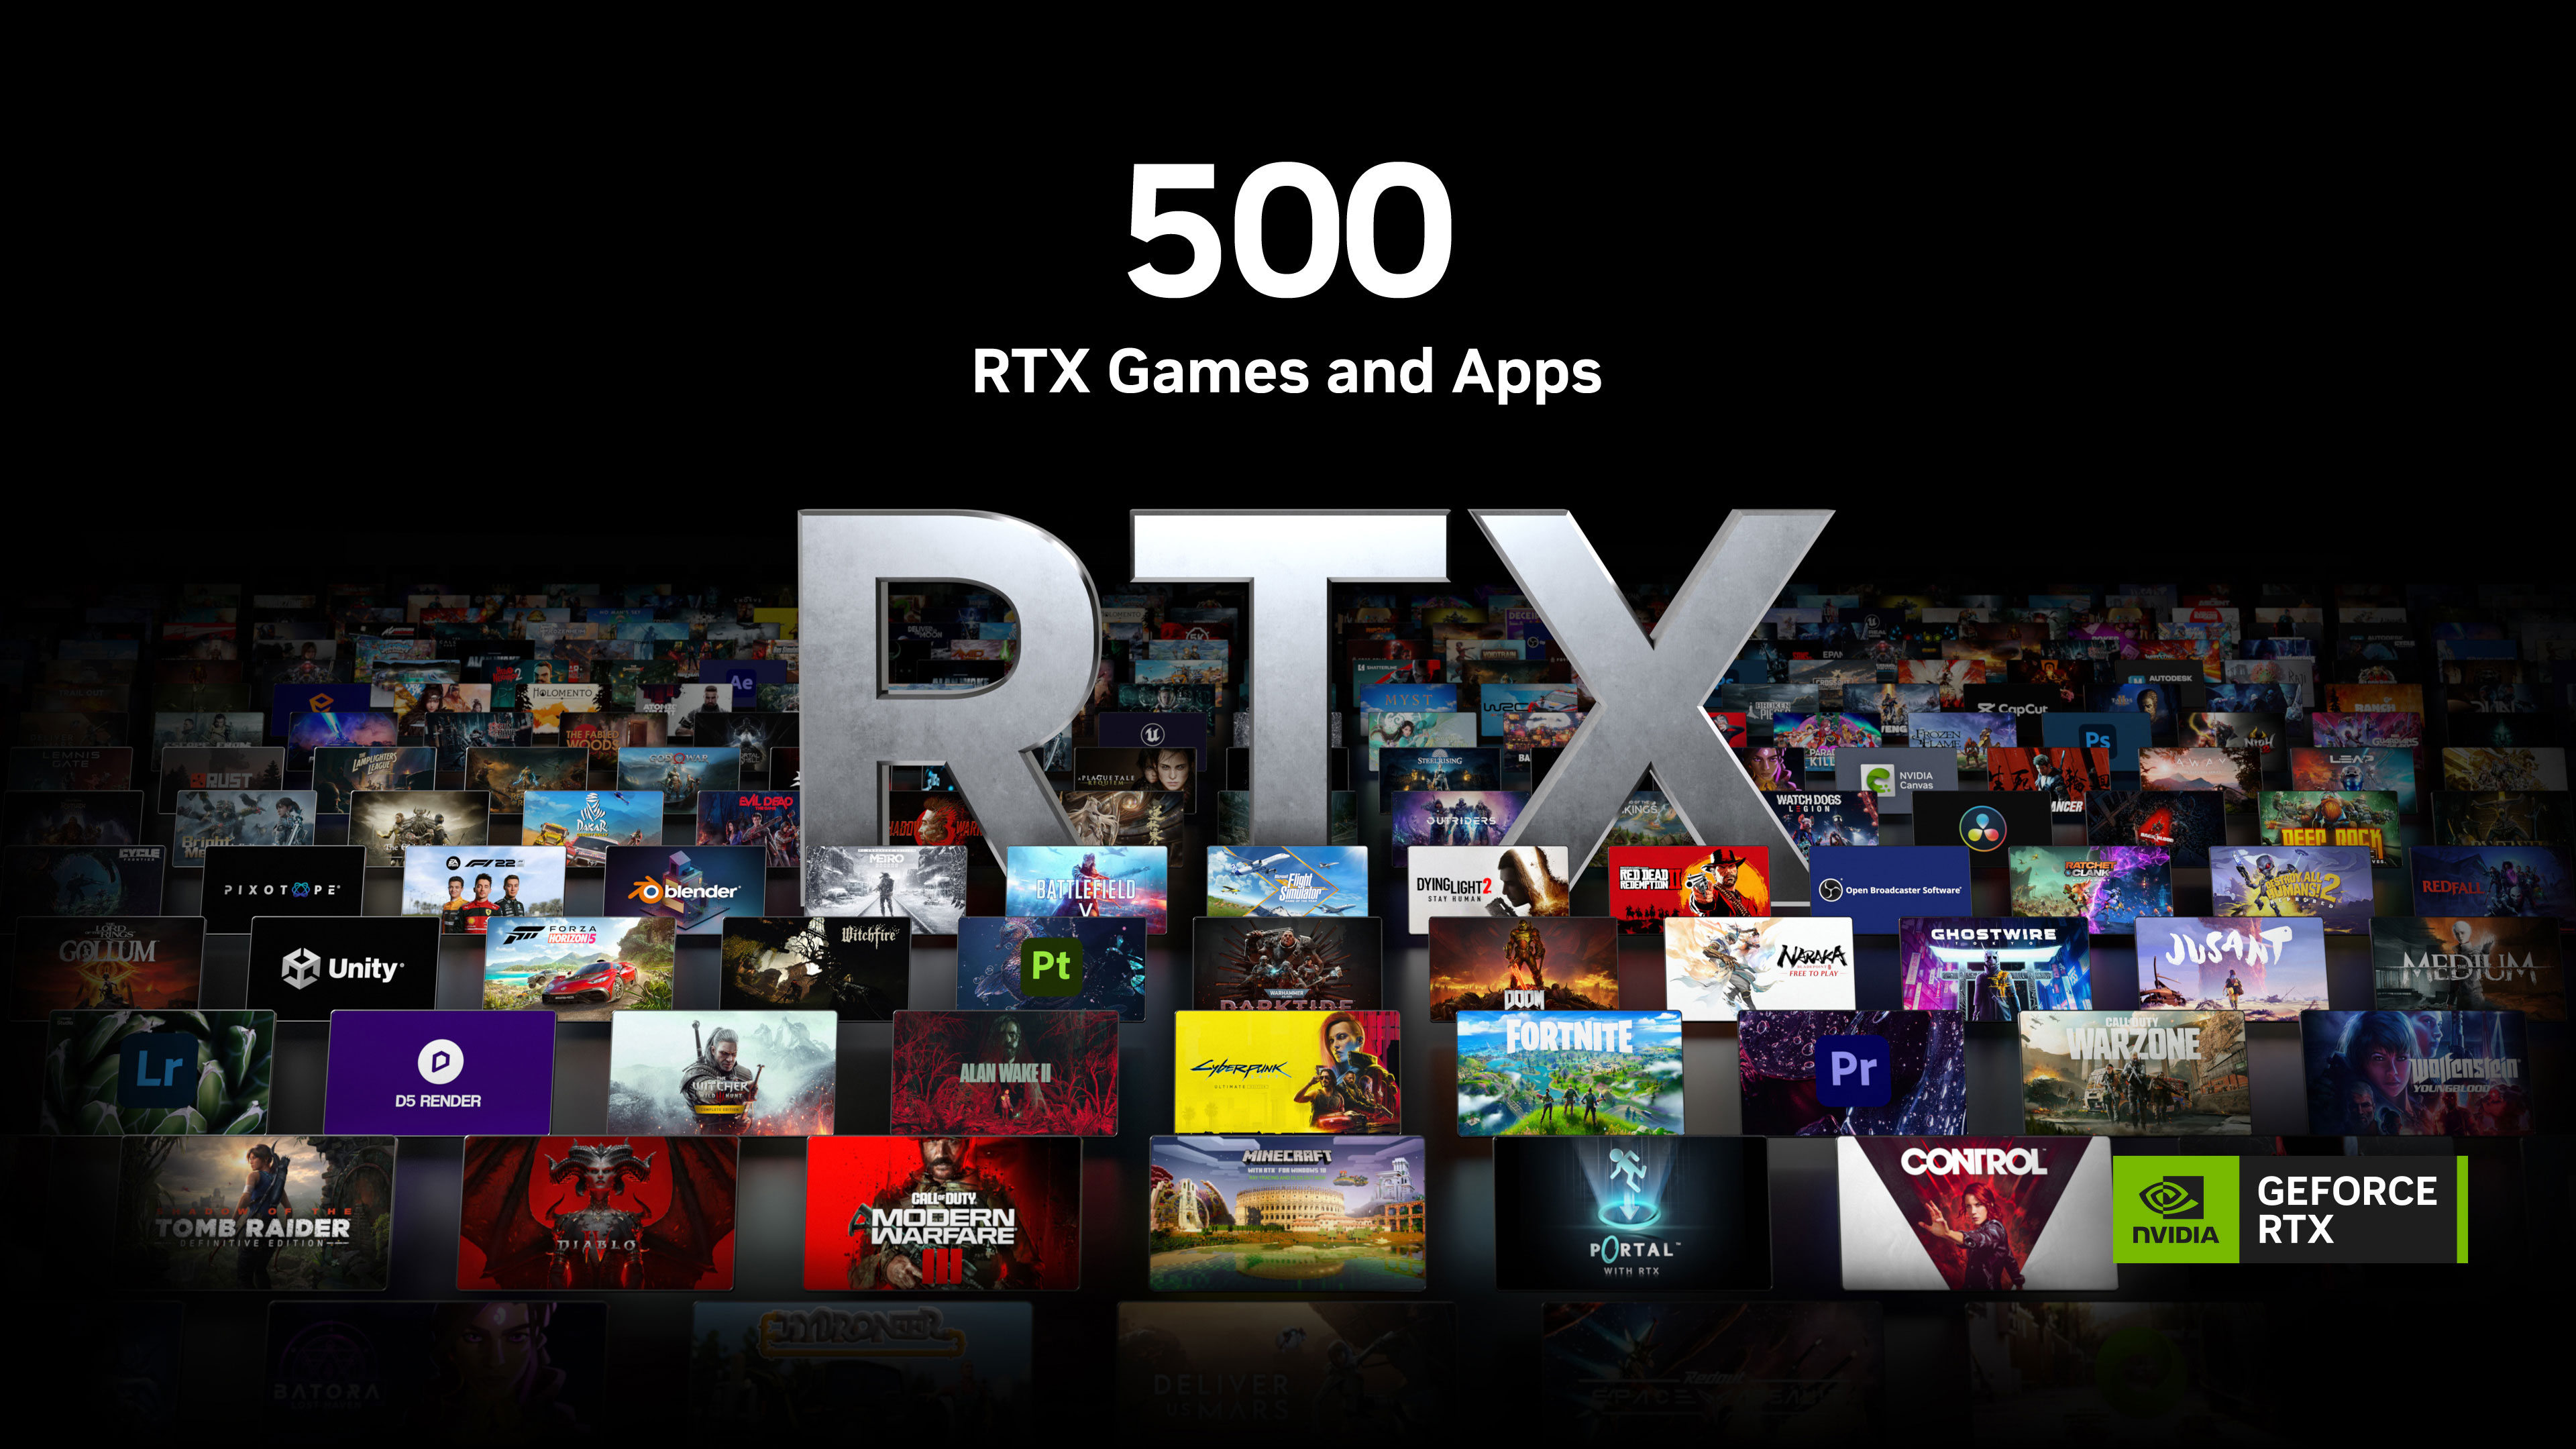 Nvidia reaches an RTX milestone, with over 500 games and